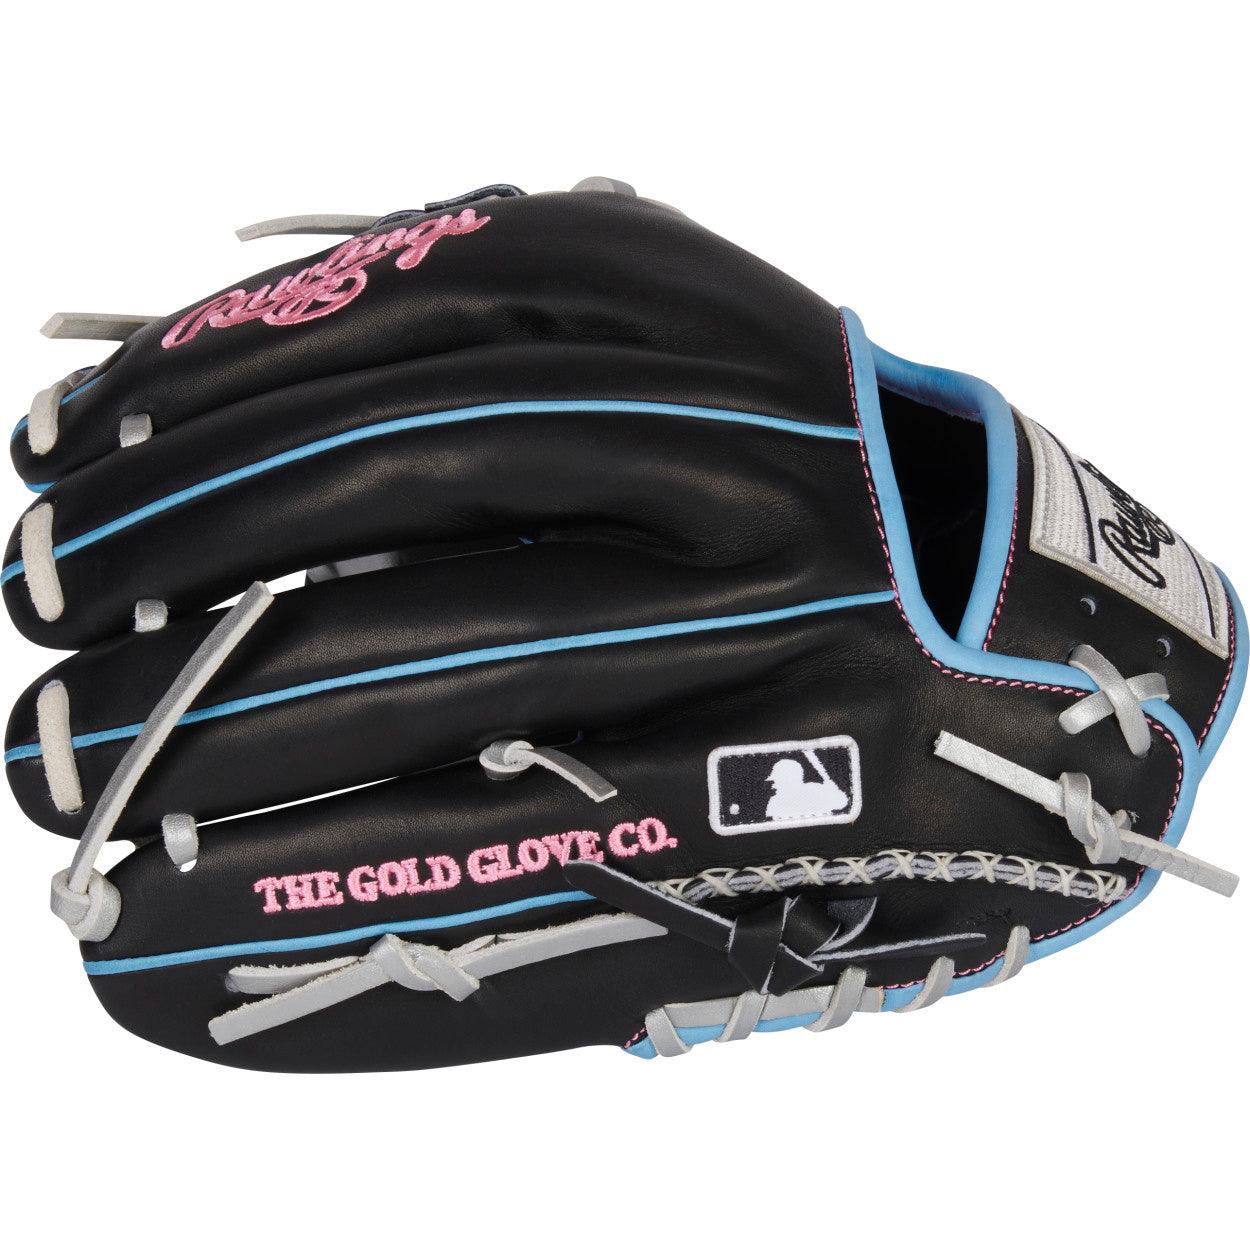 2022 Rawlings Heart of the Hide 11.50